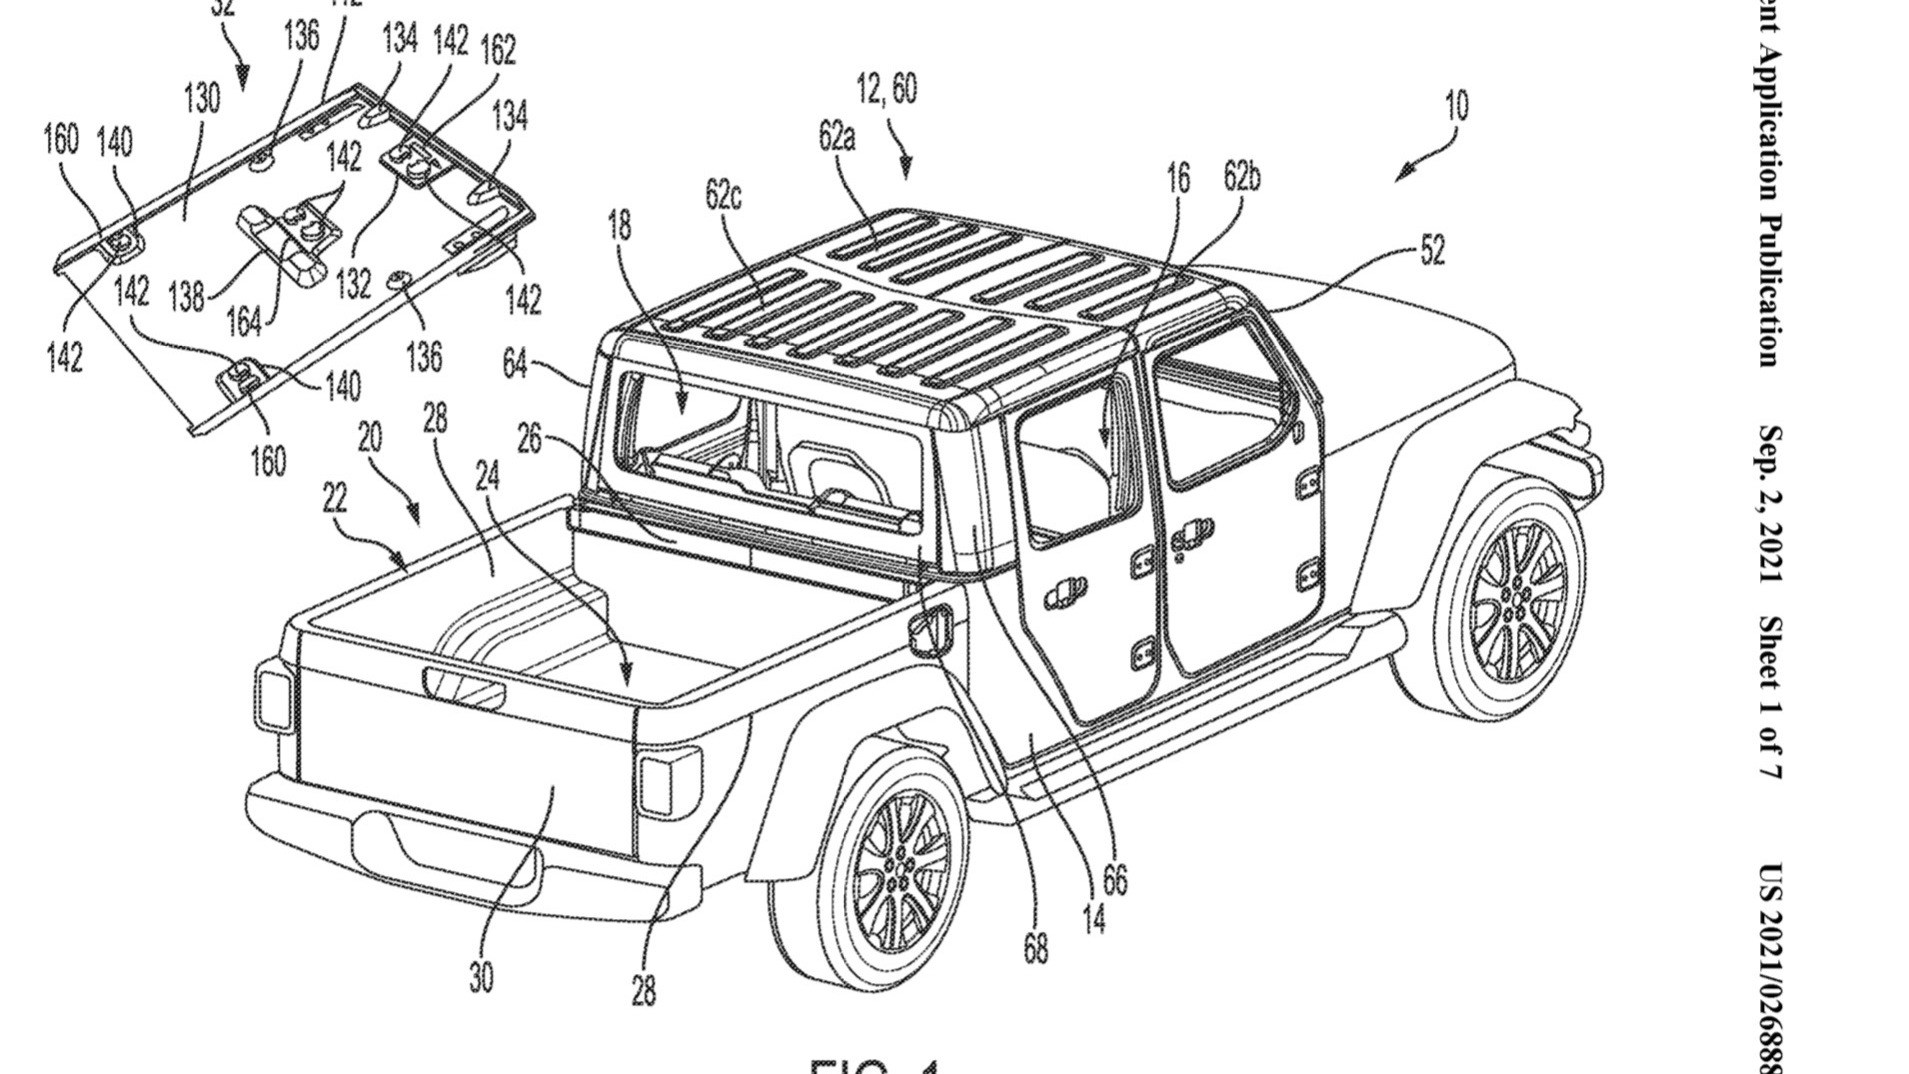 Jeep Gladiator roof panel storage on bed tonneau cover (patent image)